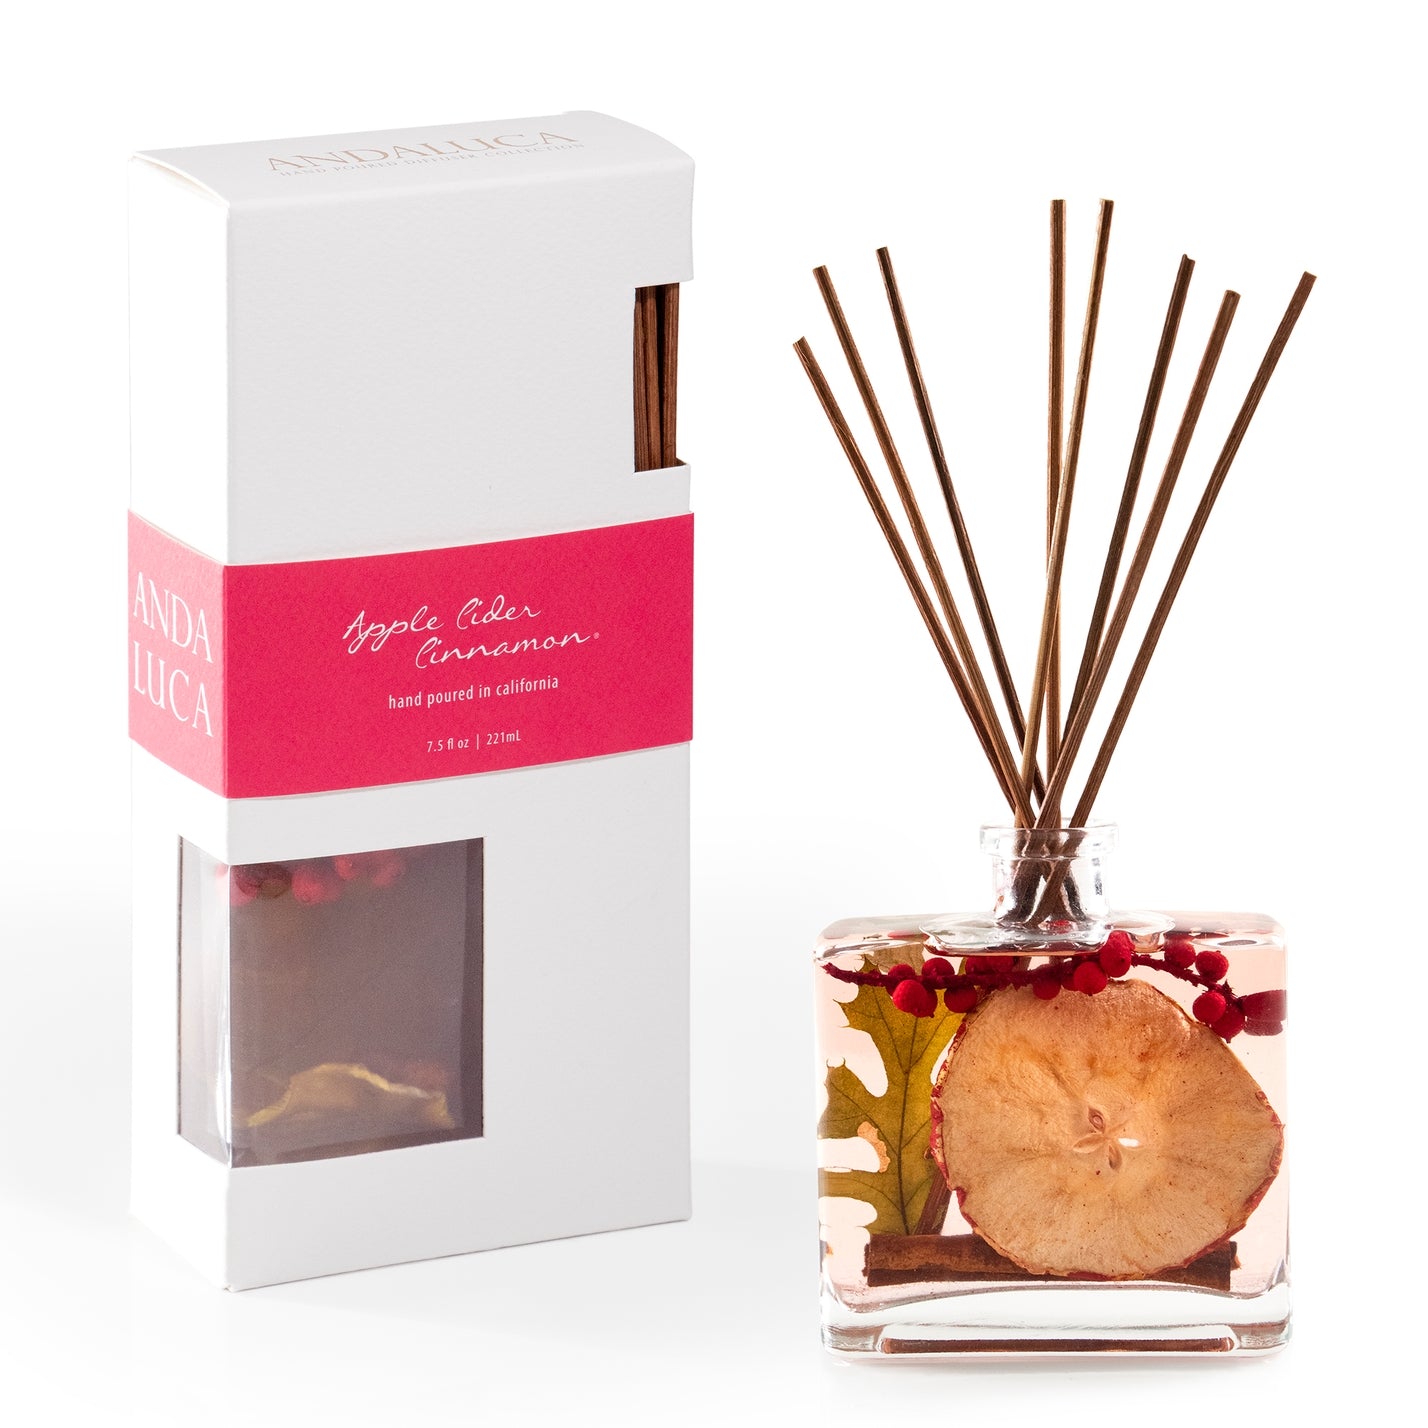 Andaluca Holiday Reed Diffusers